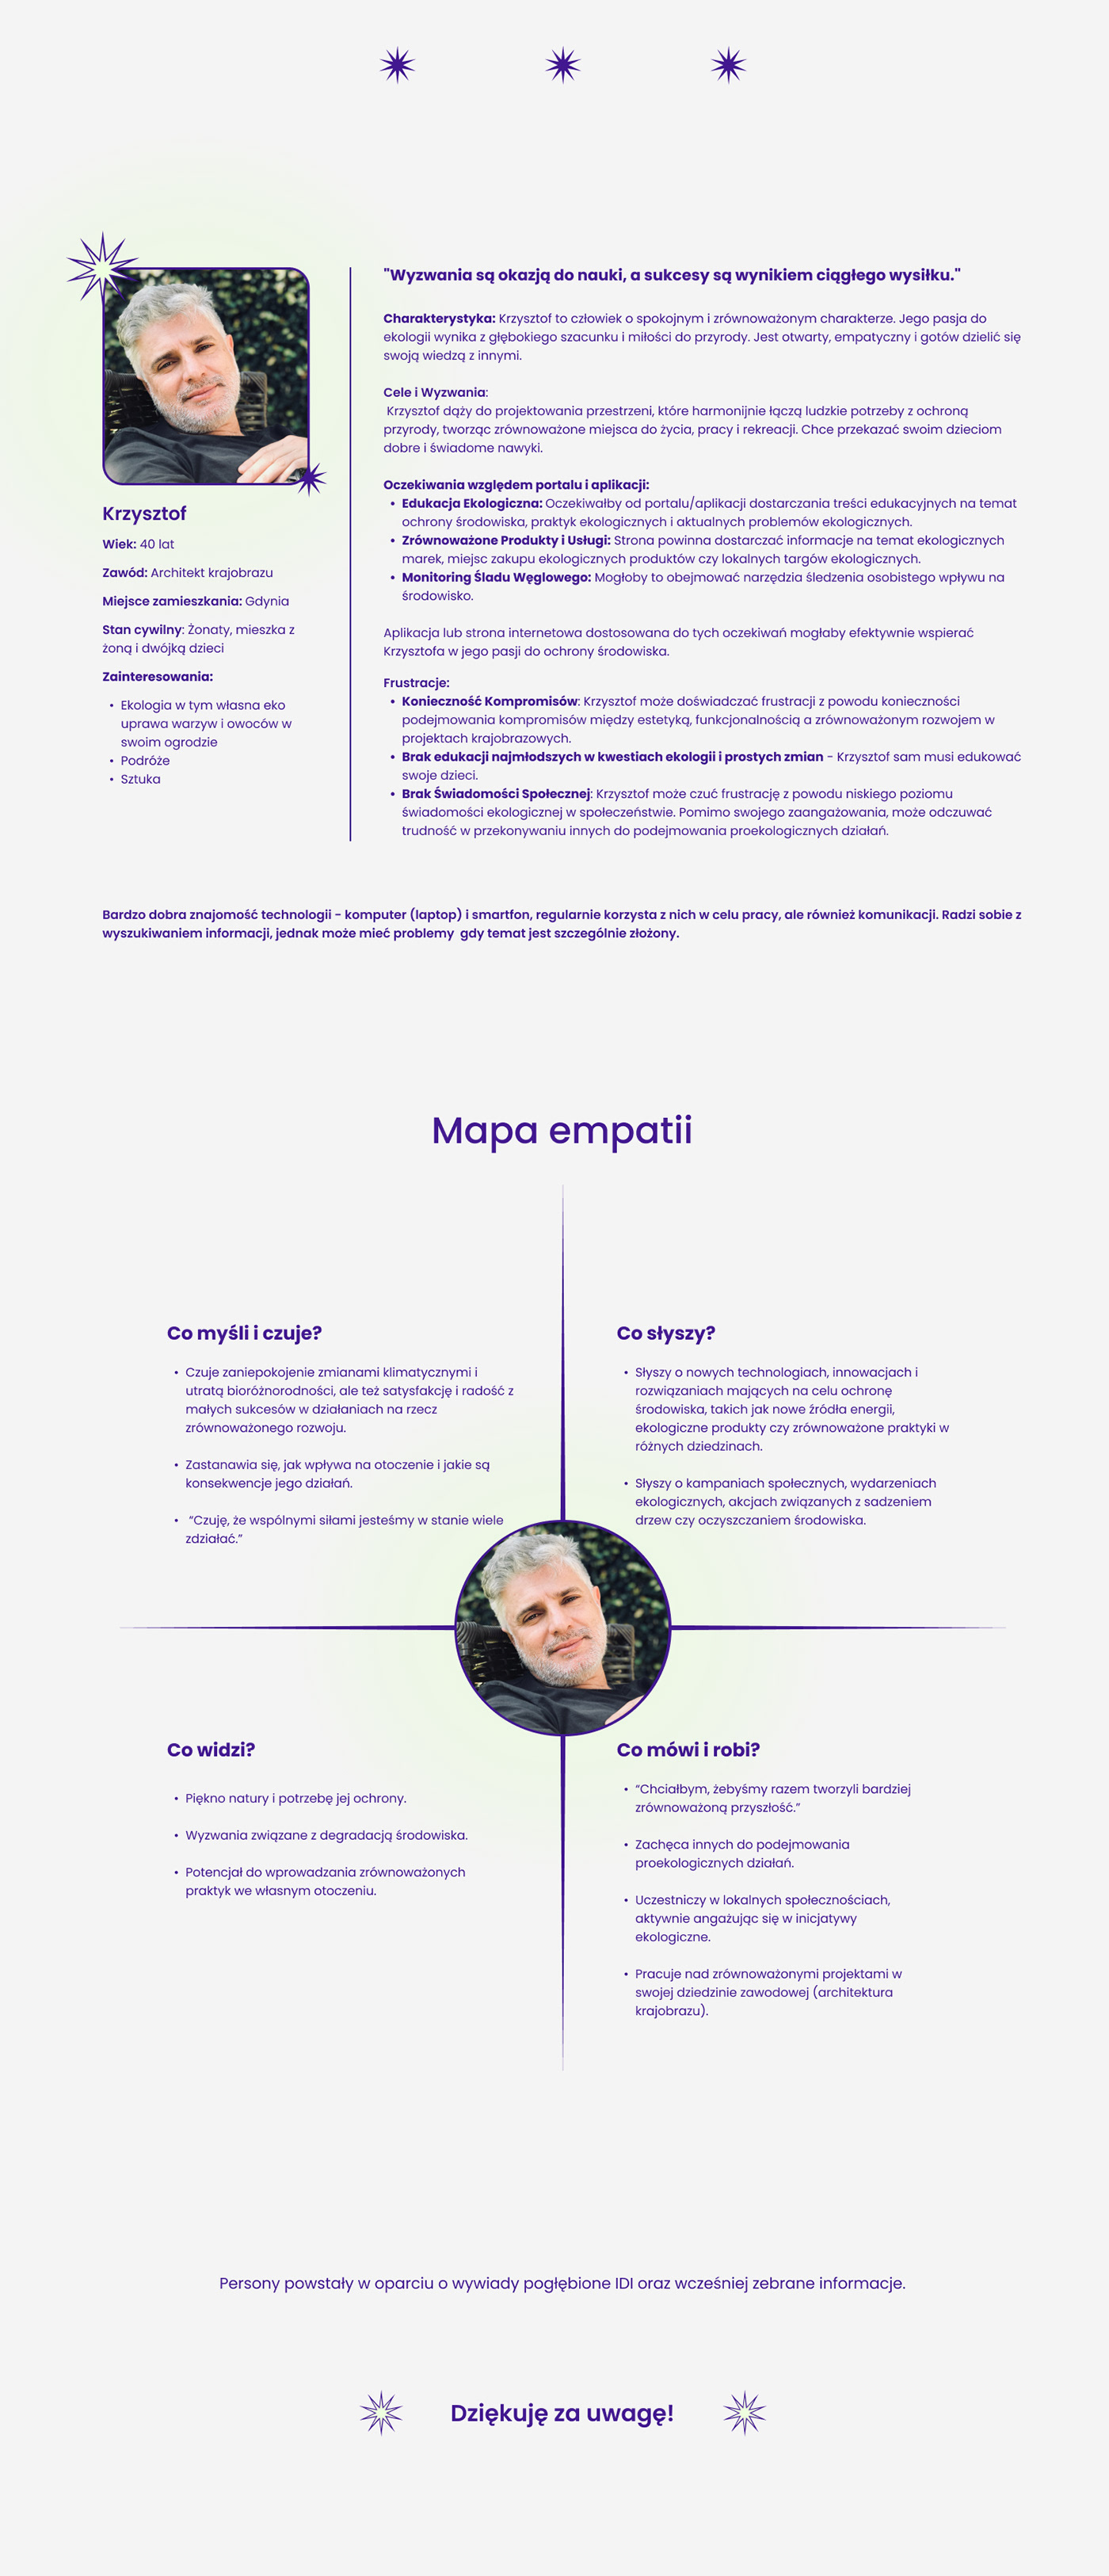 Userpersona ux UI/UX UX design Case Study user personas UX Research user experience Web